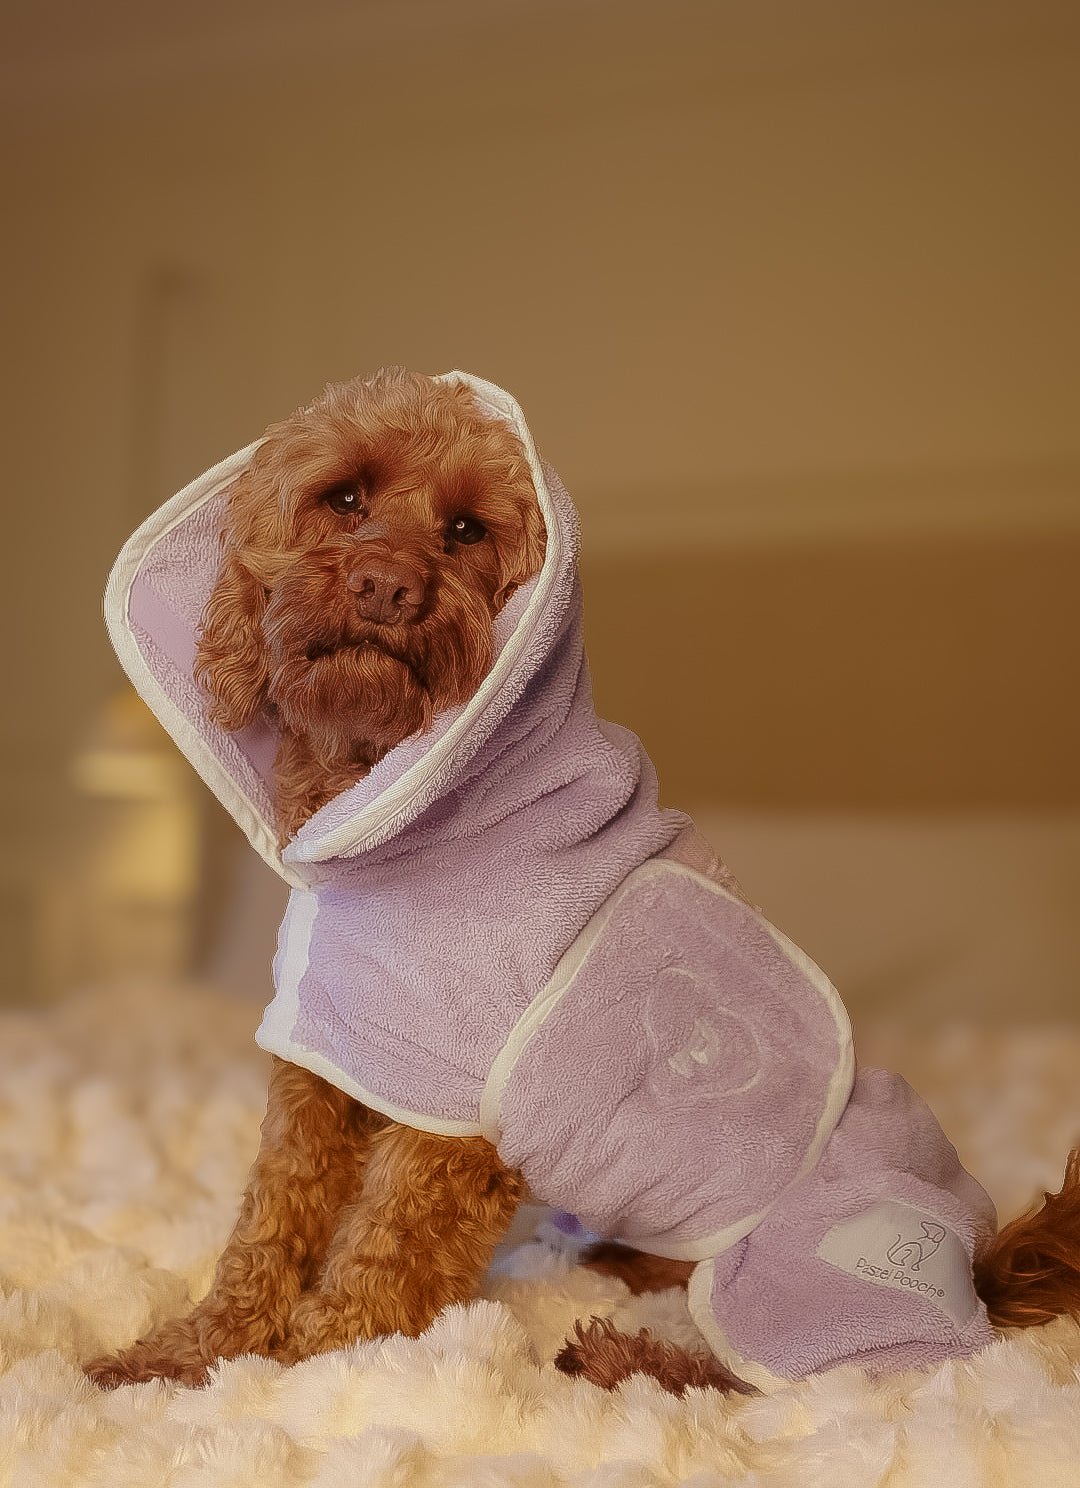 Dog - English Bulldog - puppy dressed up in pink dressing gown with ice  pack / cold compress & painted nails. - SuperStock